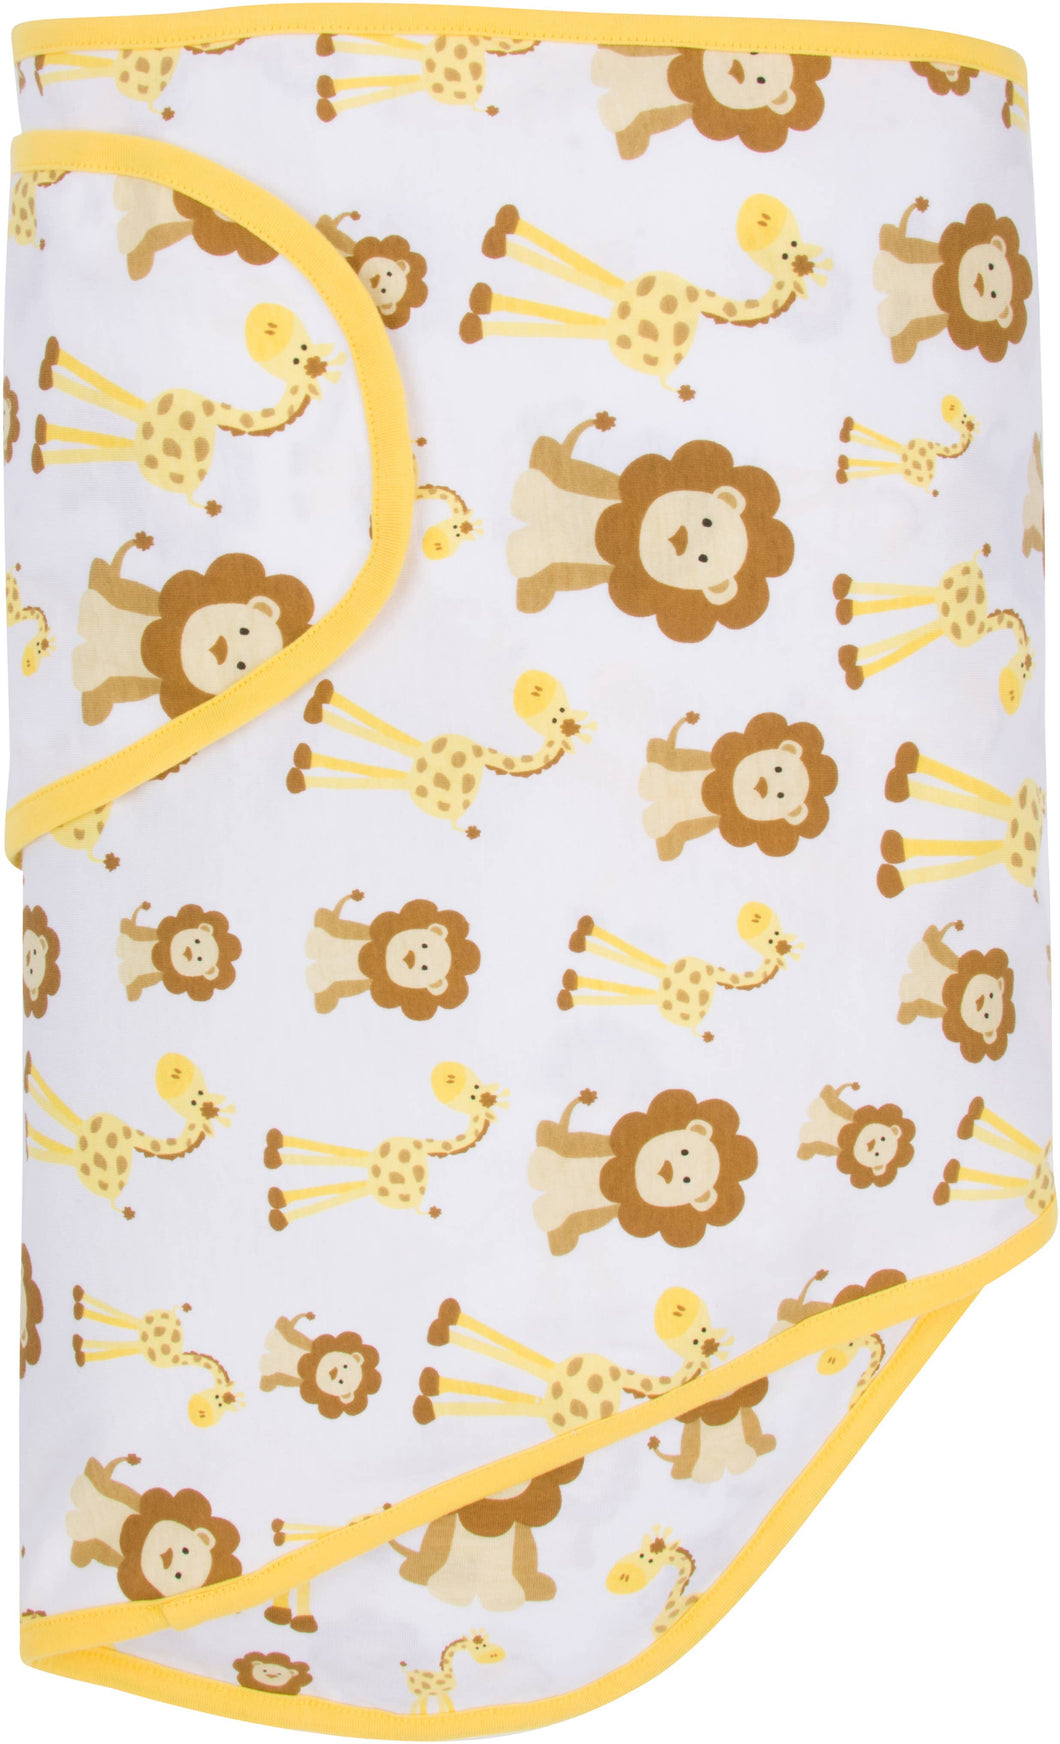 Giraffes and Lions with Butter Yellow Trim Miracle Blanket